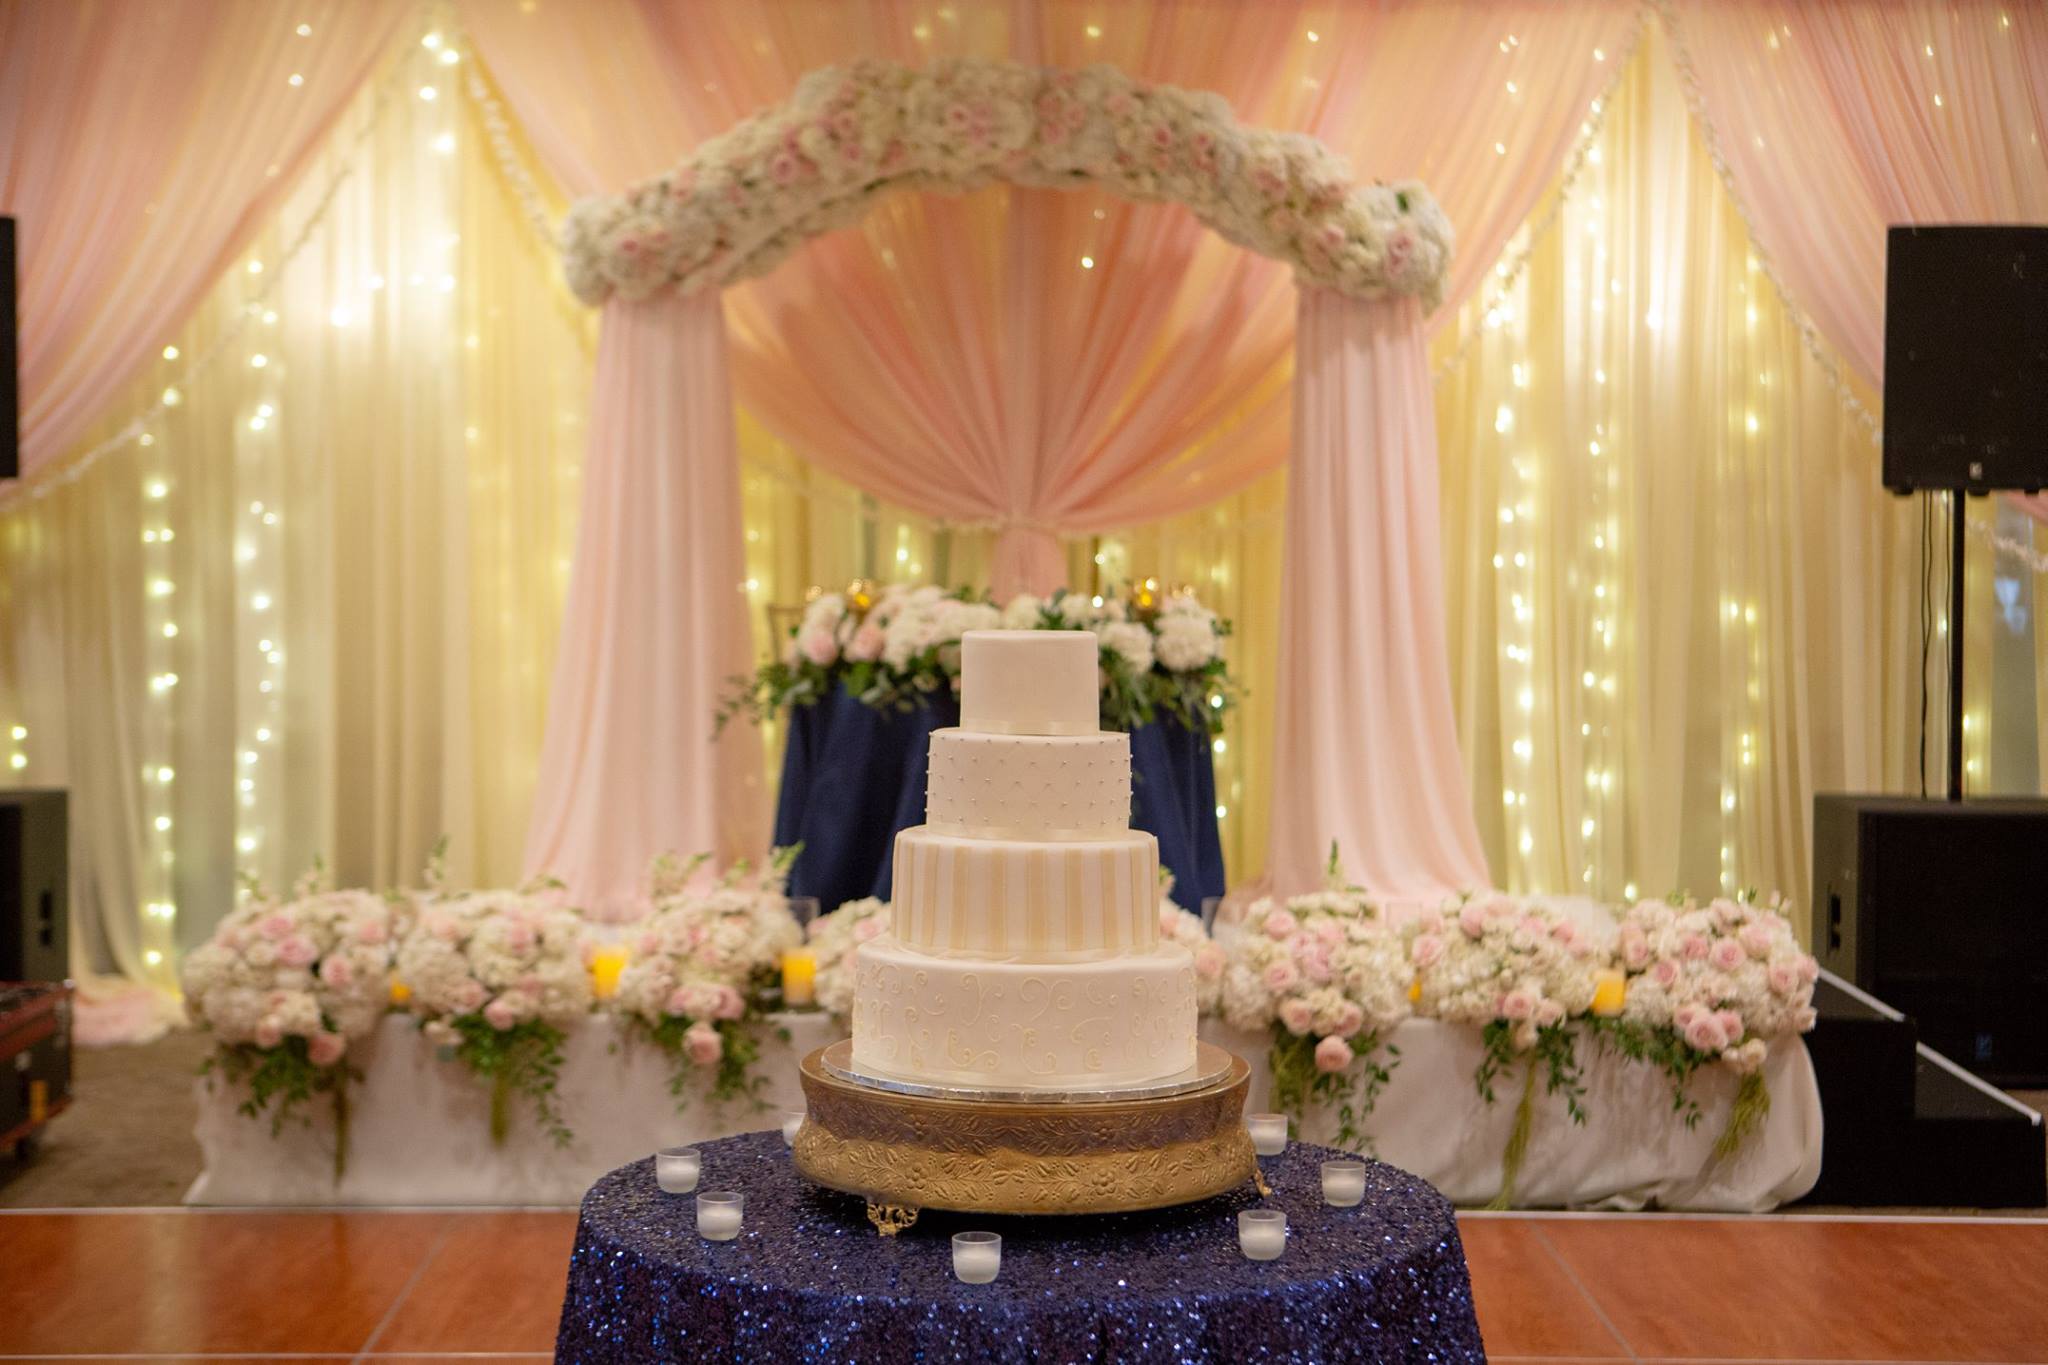 Staged four-tier wedding cake in front of rose and white pipe and drape setup at wedding